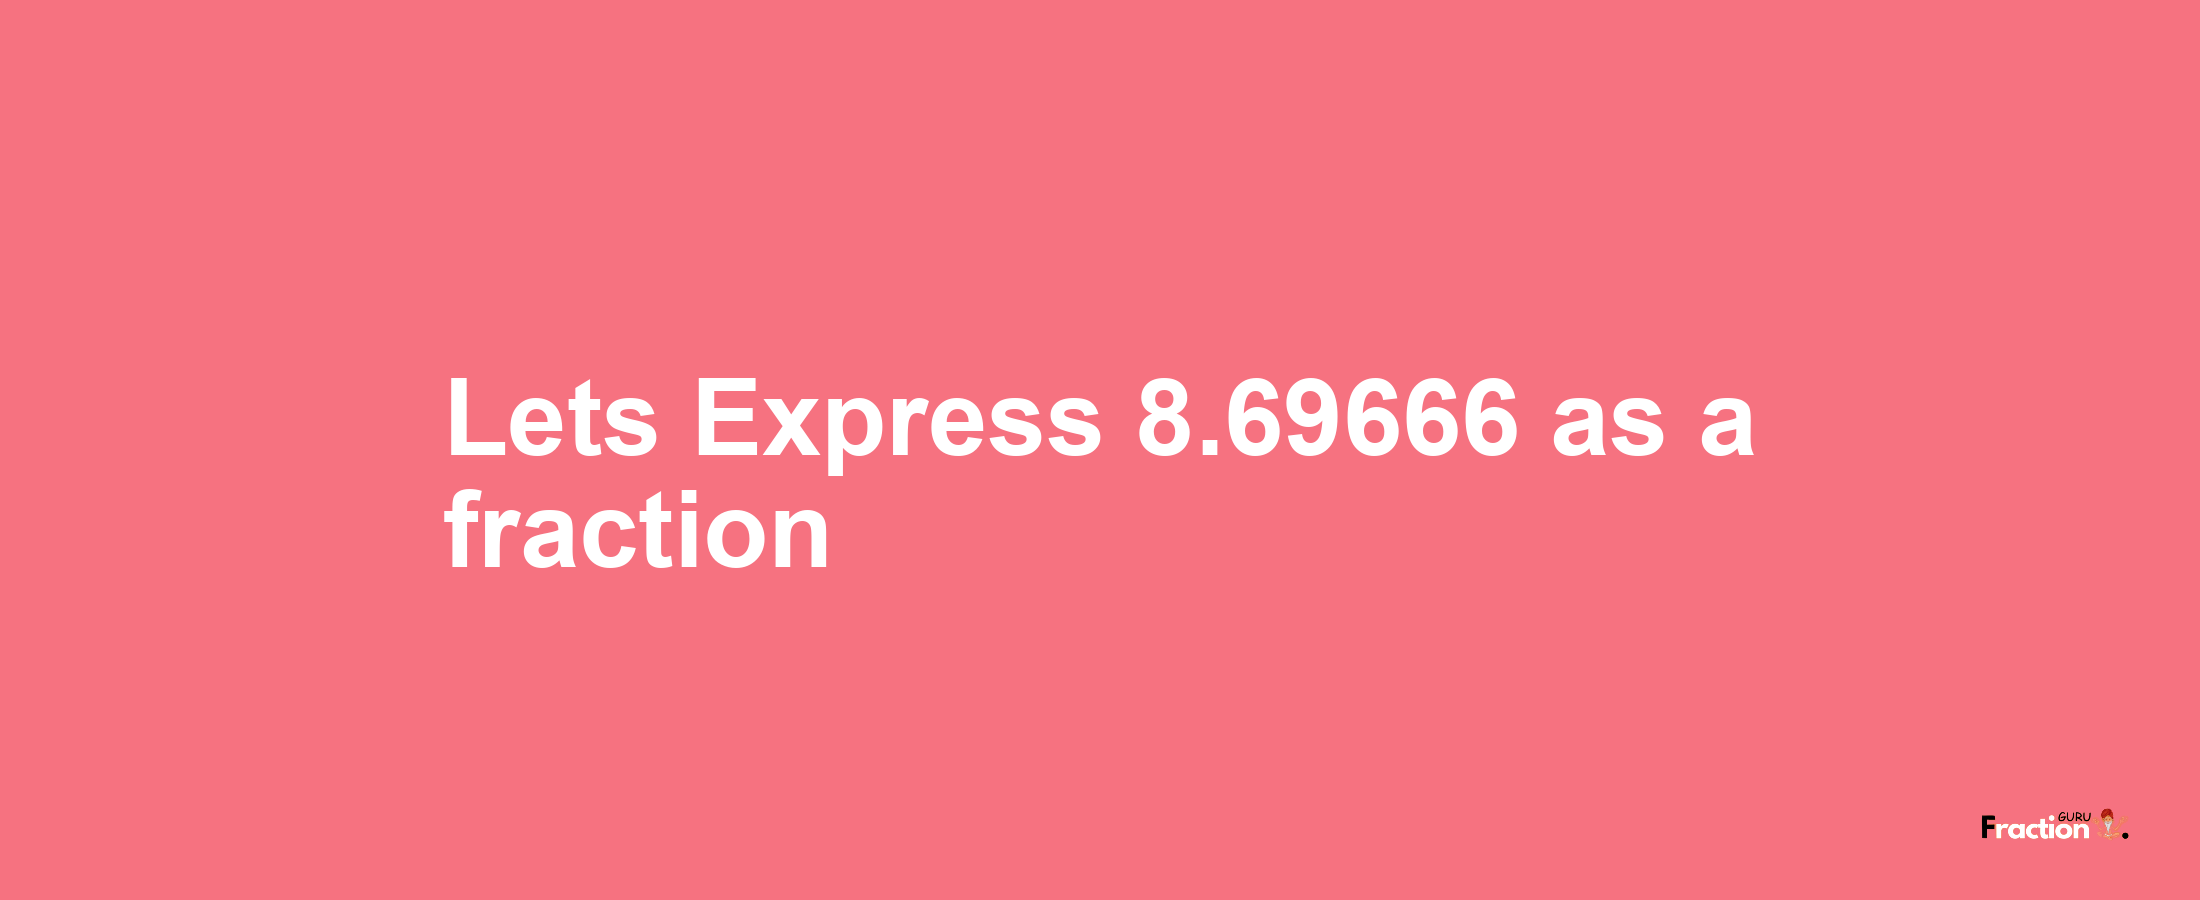 Lets Express 8.69666 as afraction